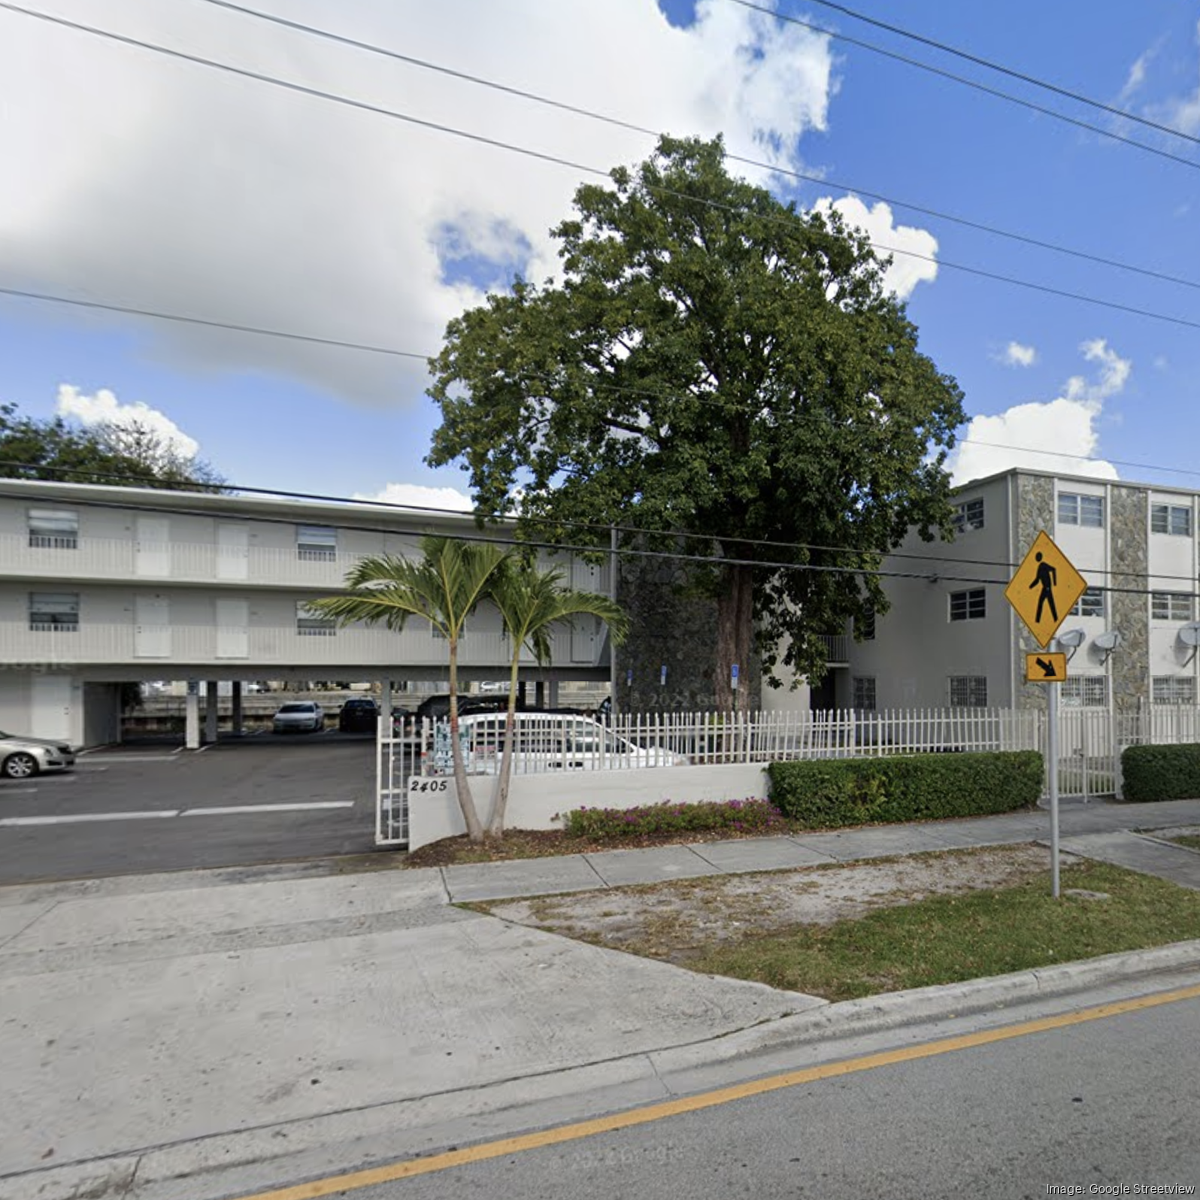 led Charles firm South Florida Sacher - Firm sells Opa-Locka Business of Mijares Journal Ramon to apartments by